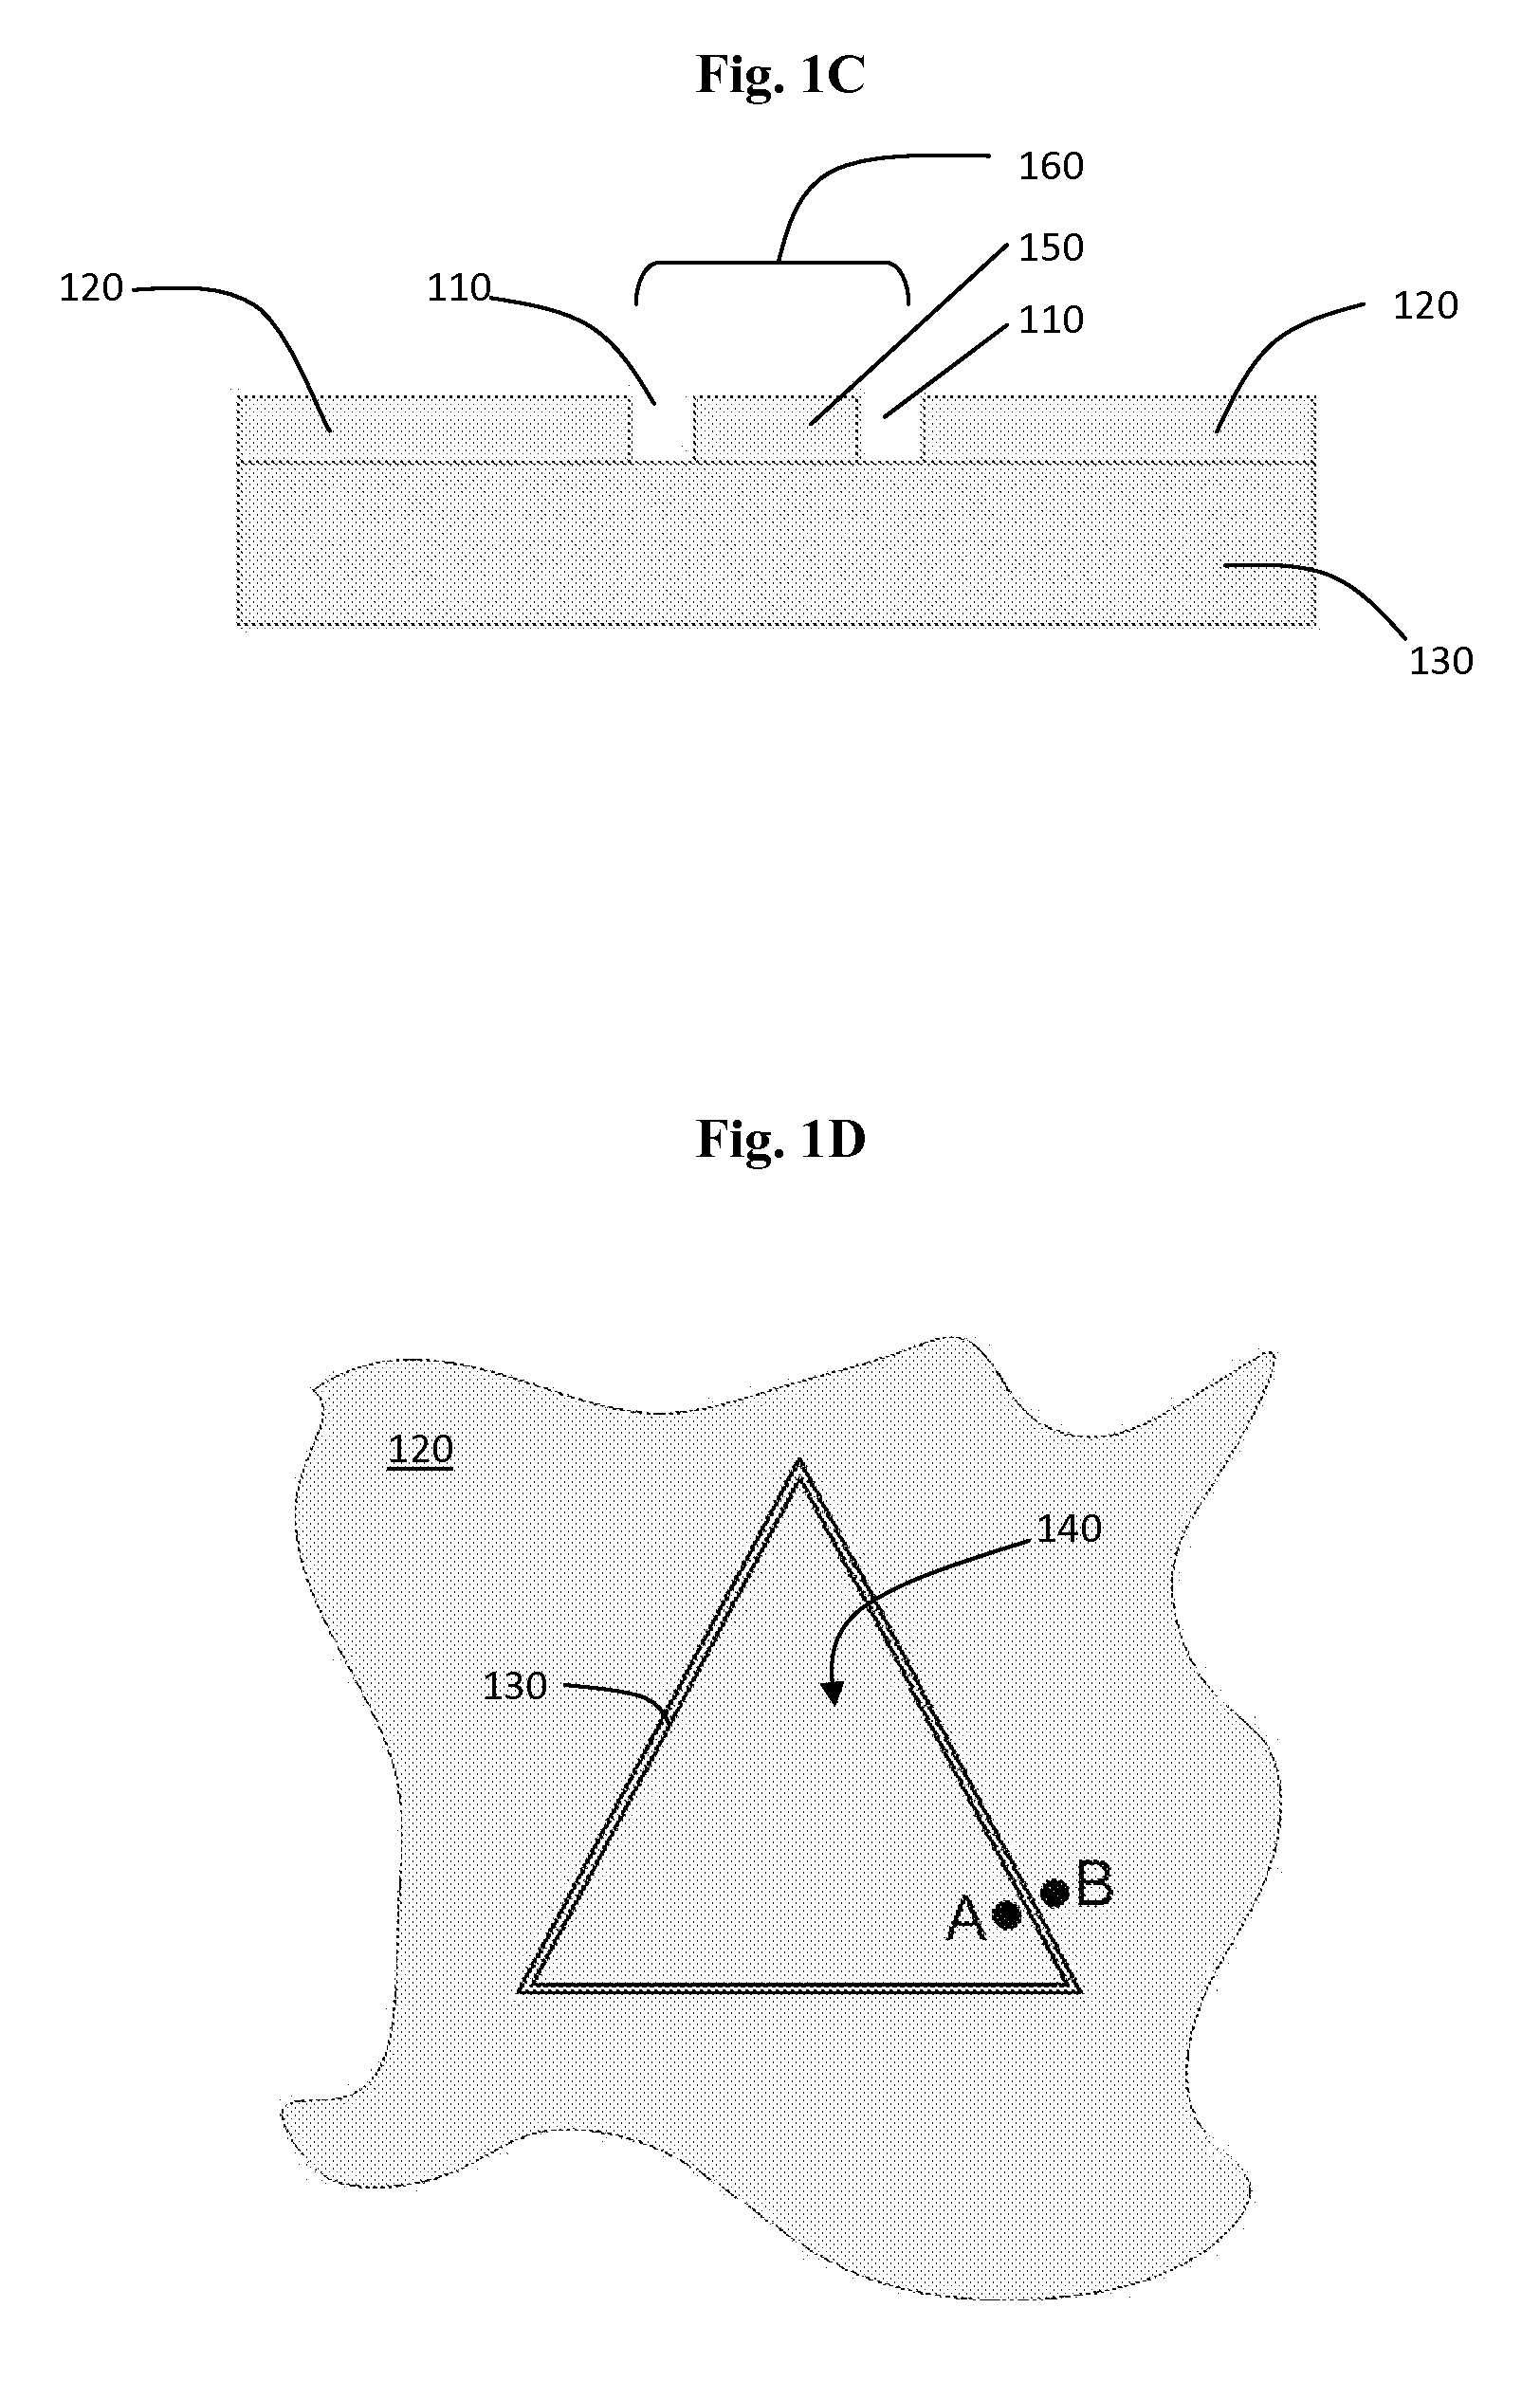 Method for Decreasing the Size and/or Changing the Shape of Pelvic Tissues